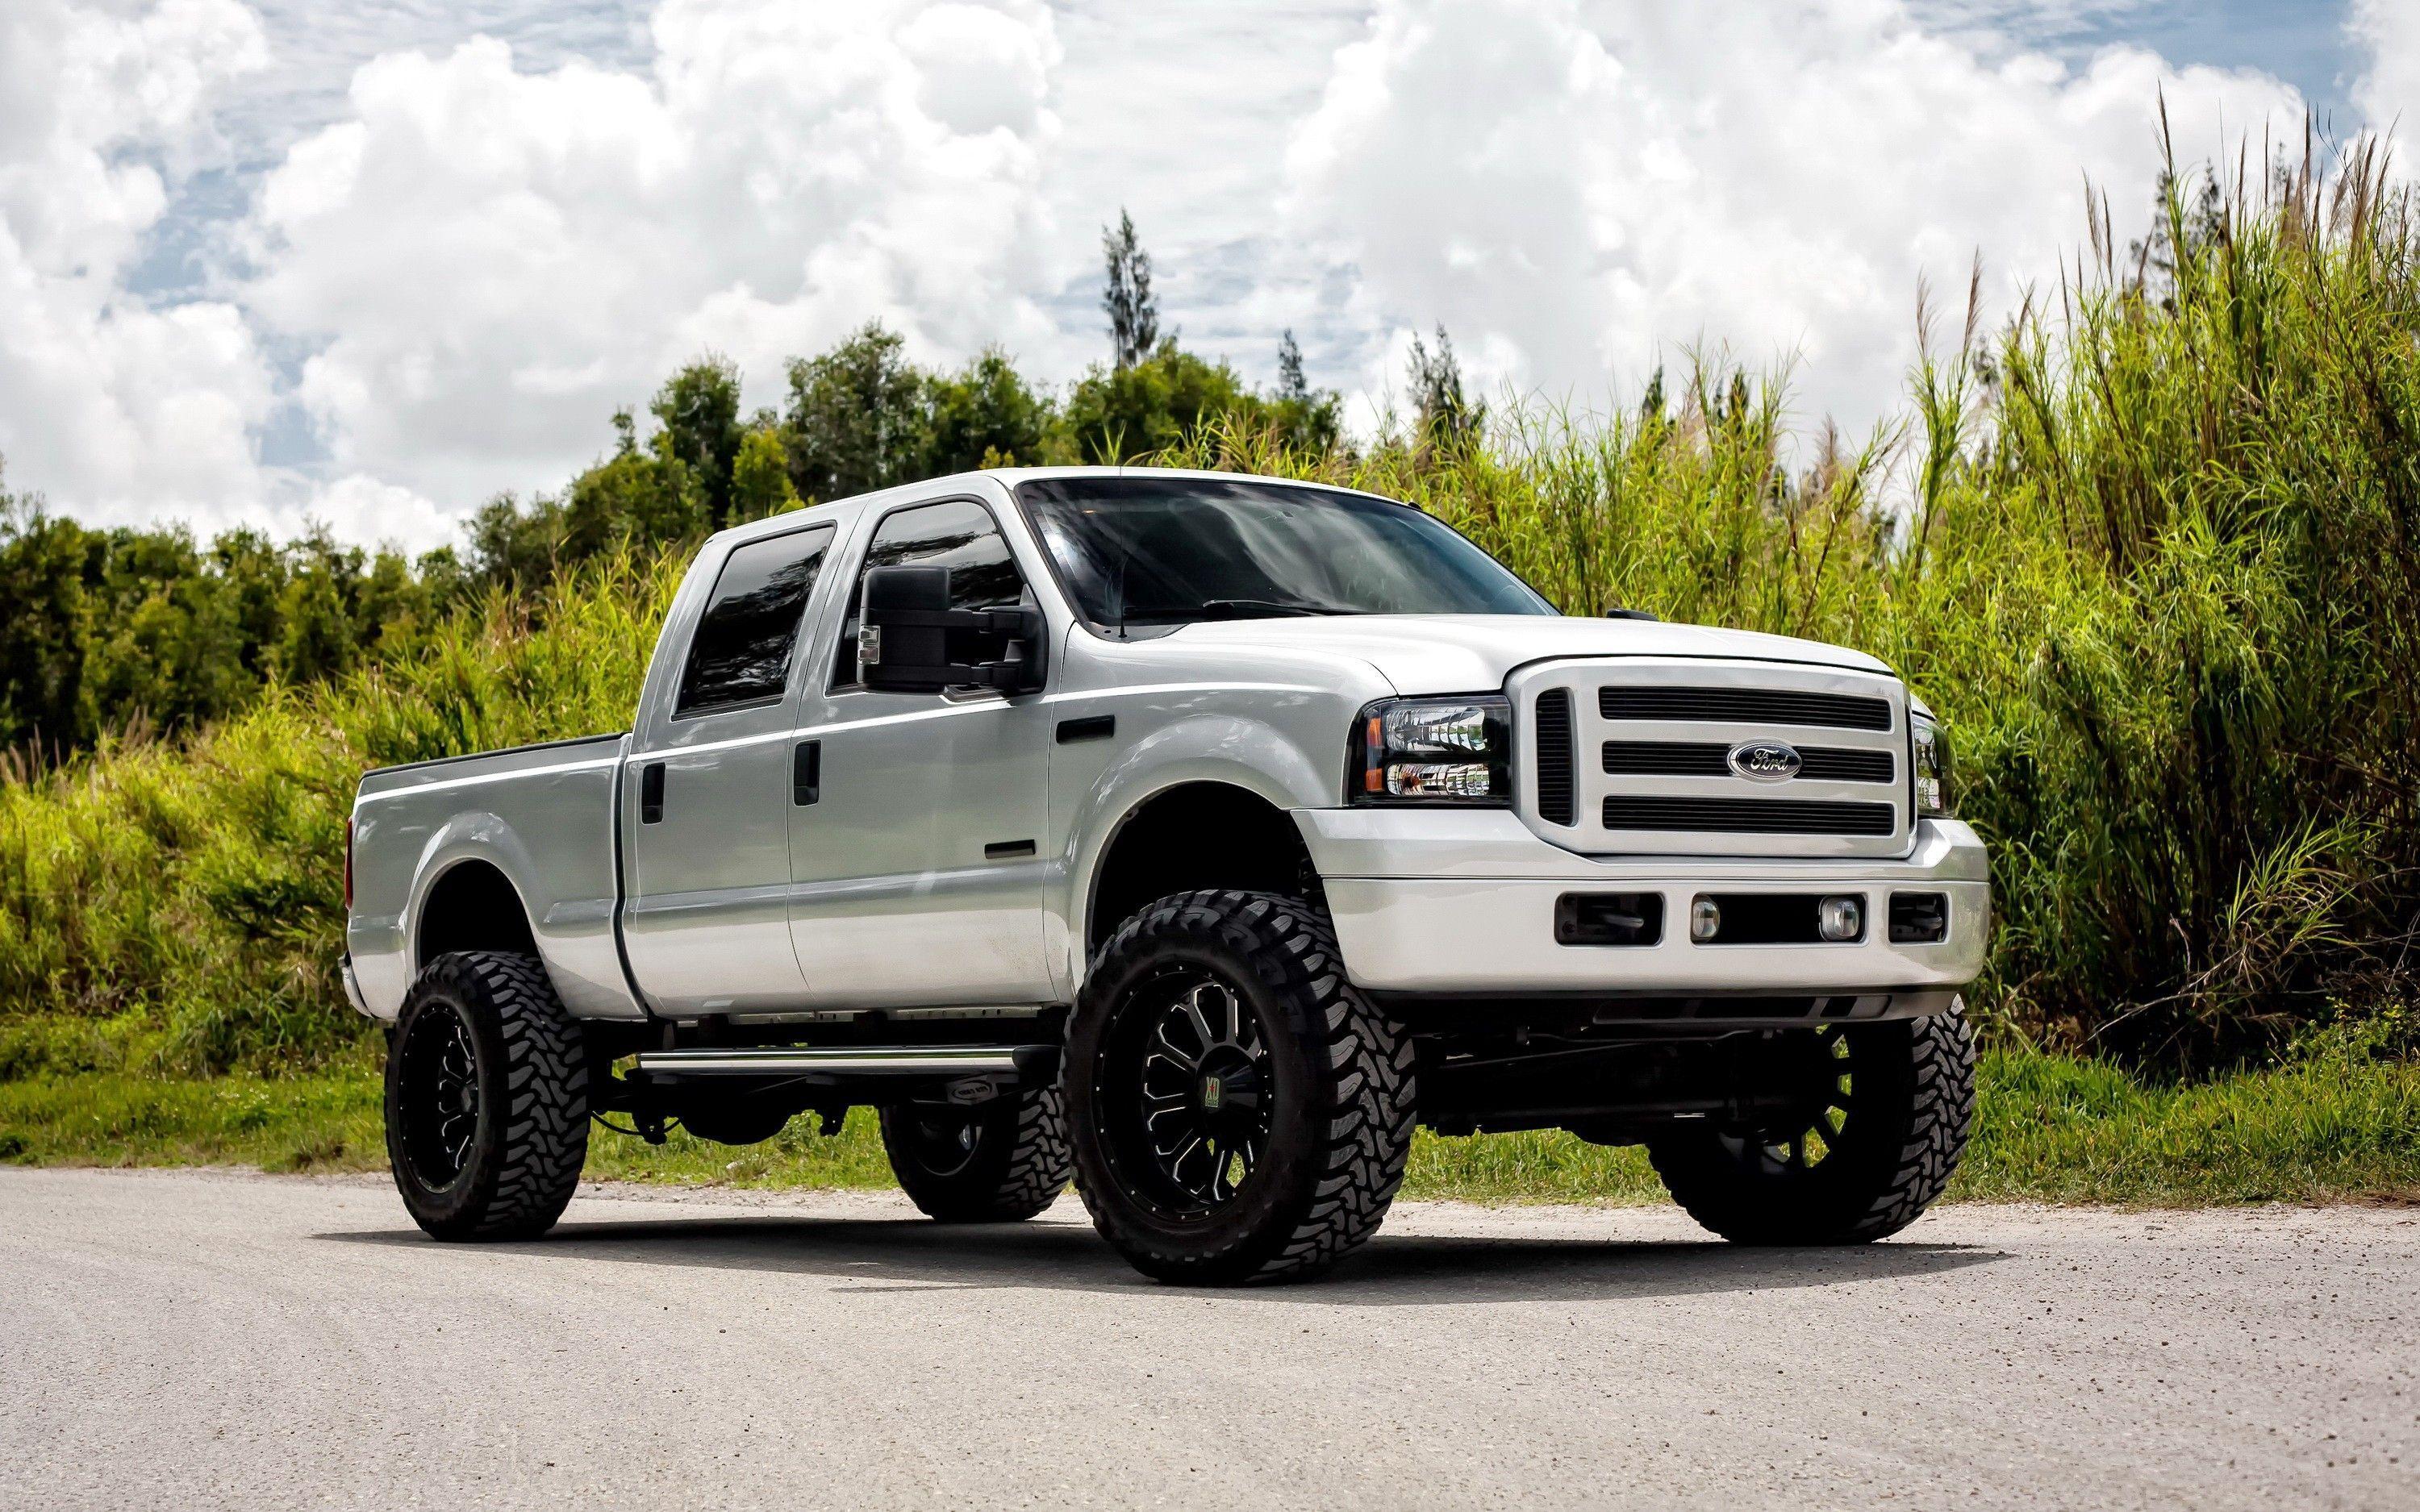 38+ Ford F 250 Super Duty Lifted Wallpaper free download